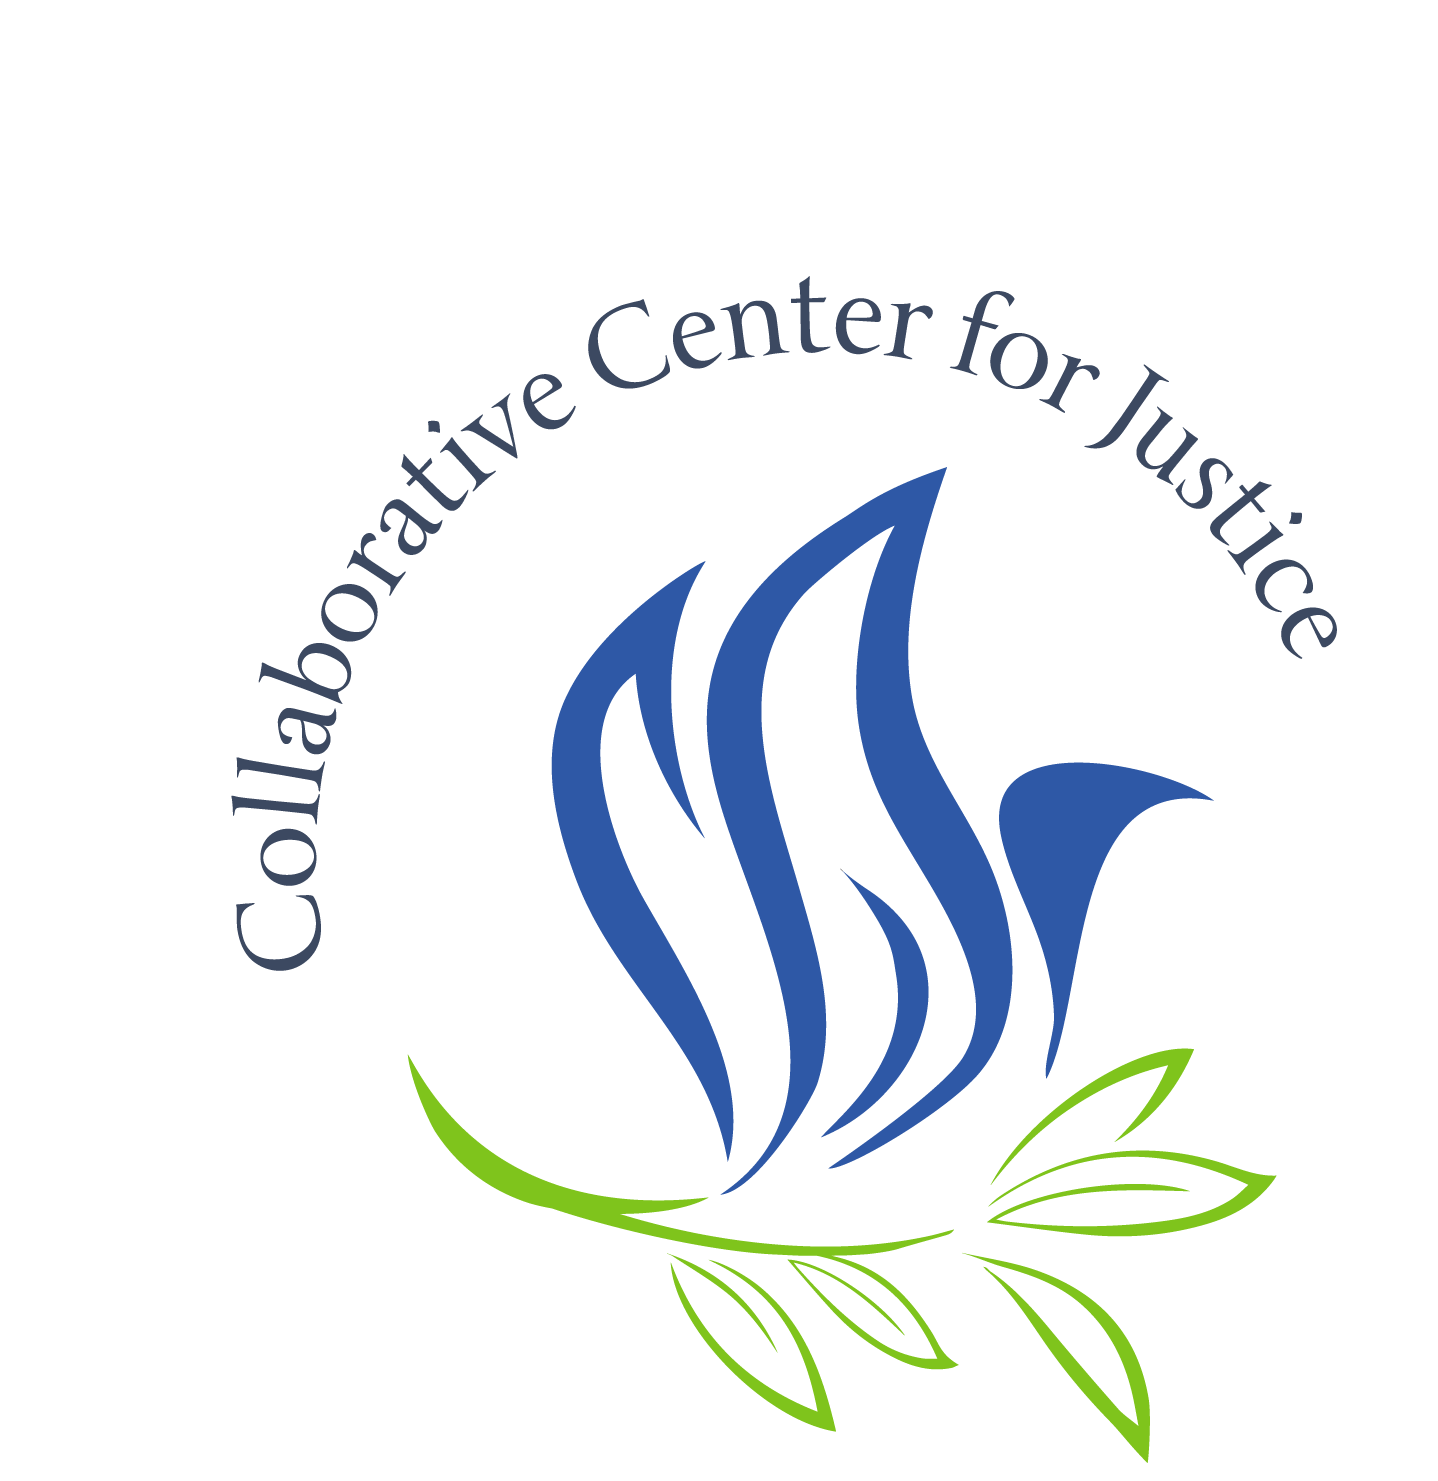 Collaborative Center For Justice